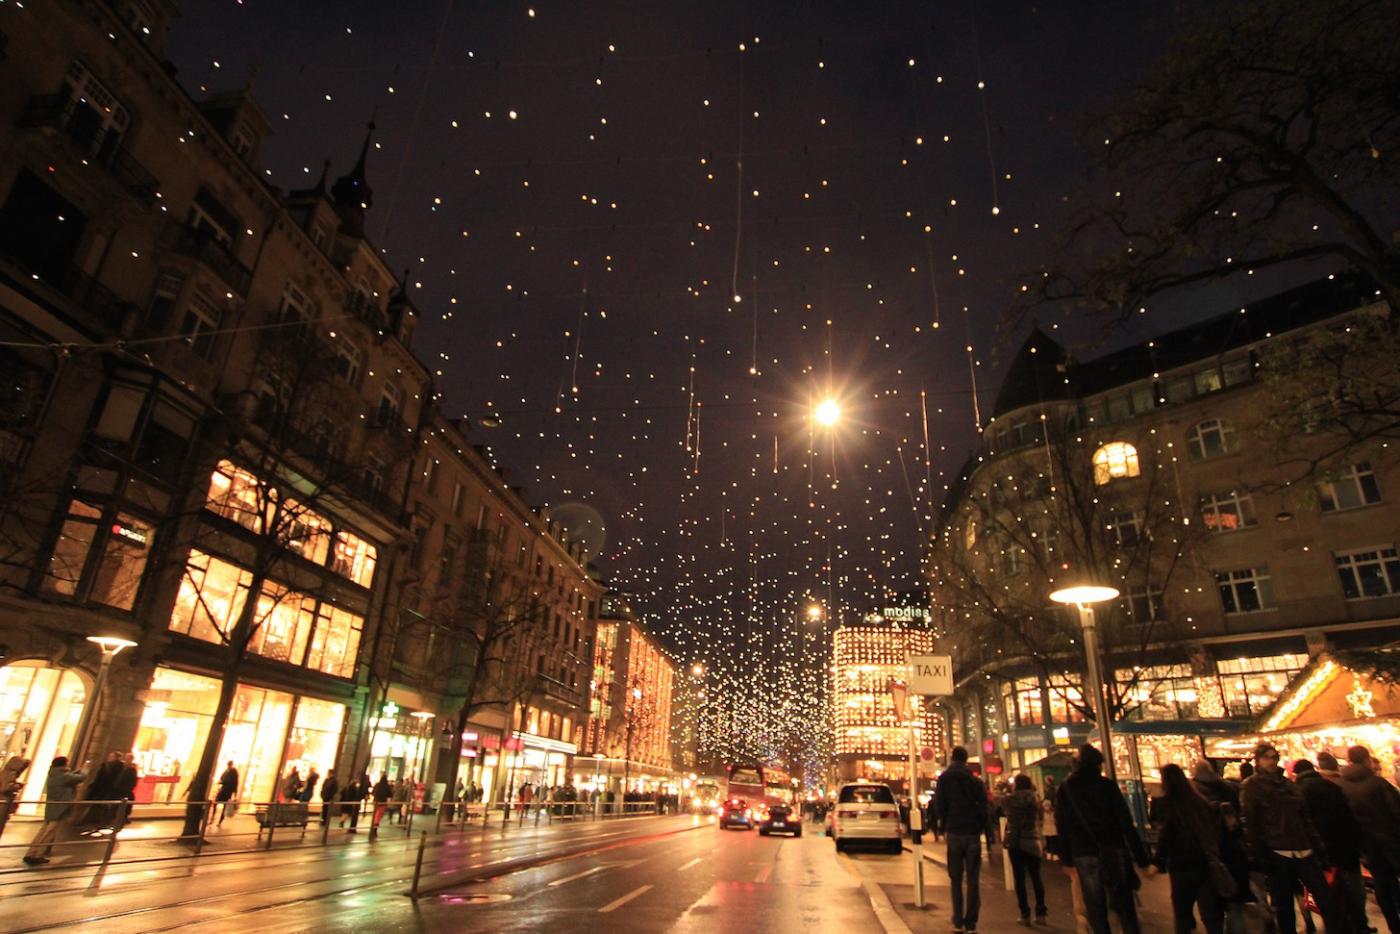 Zurich during the holiday season.